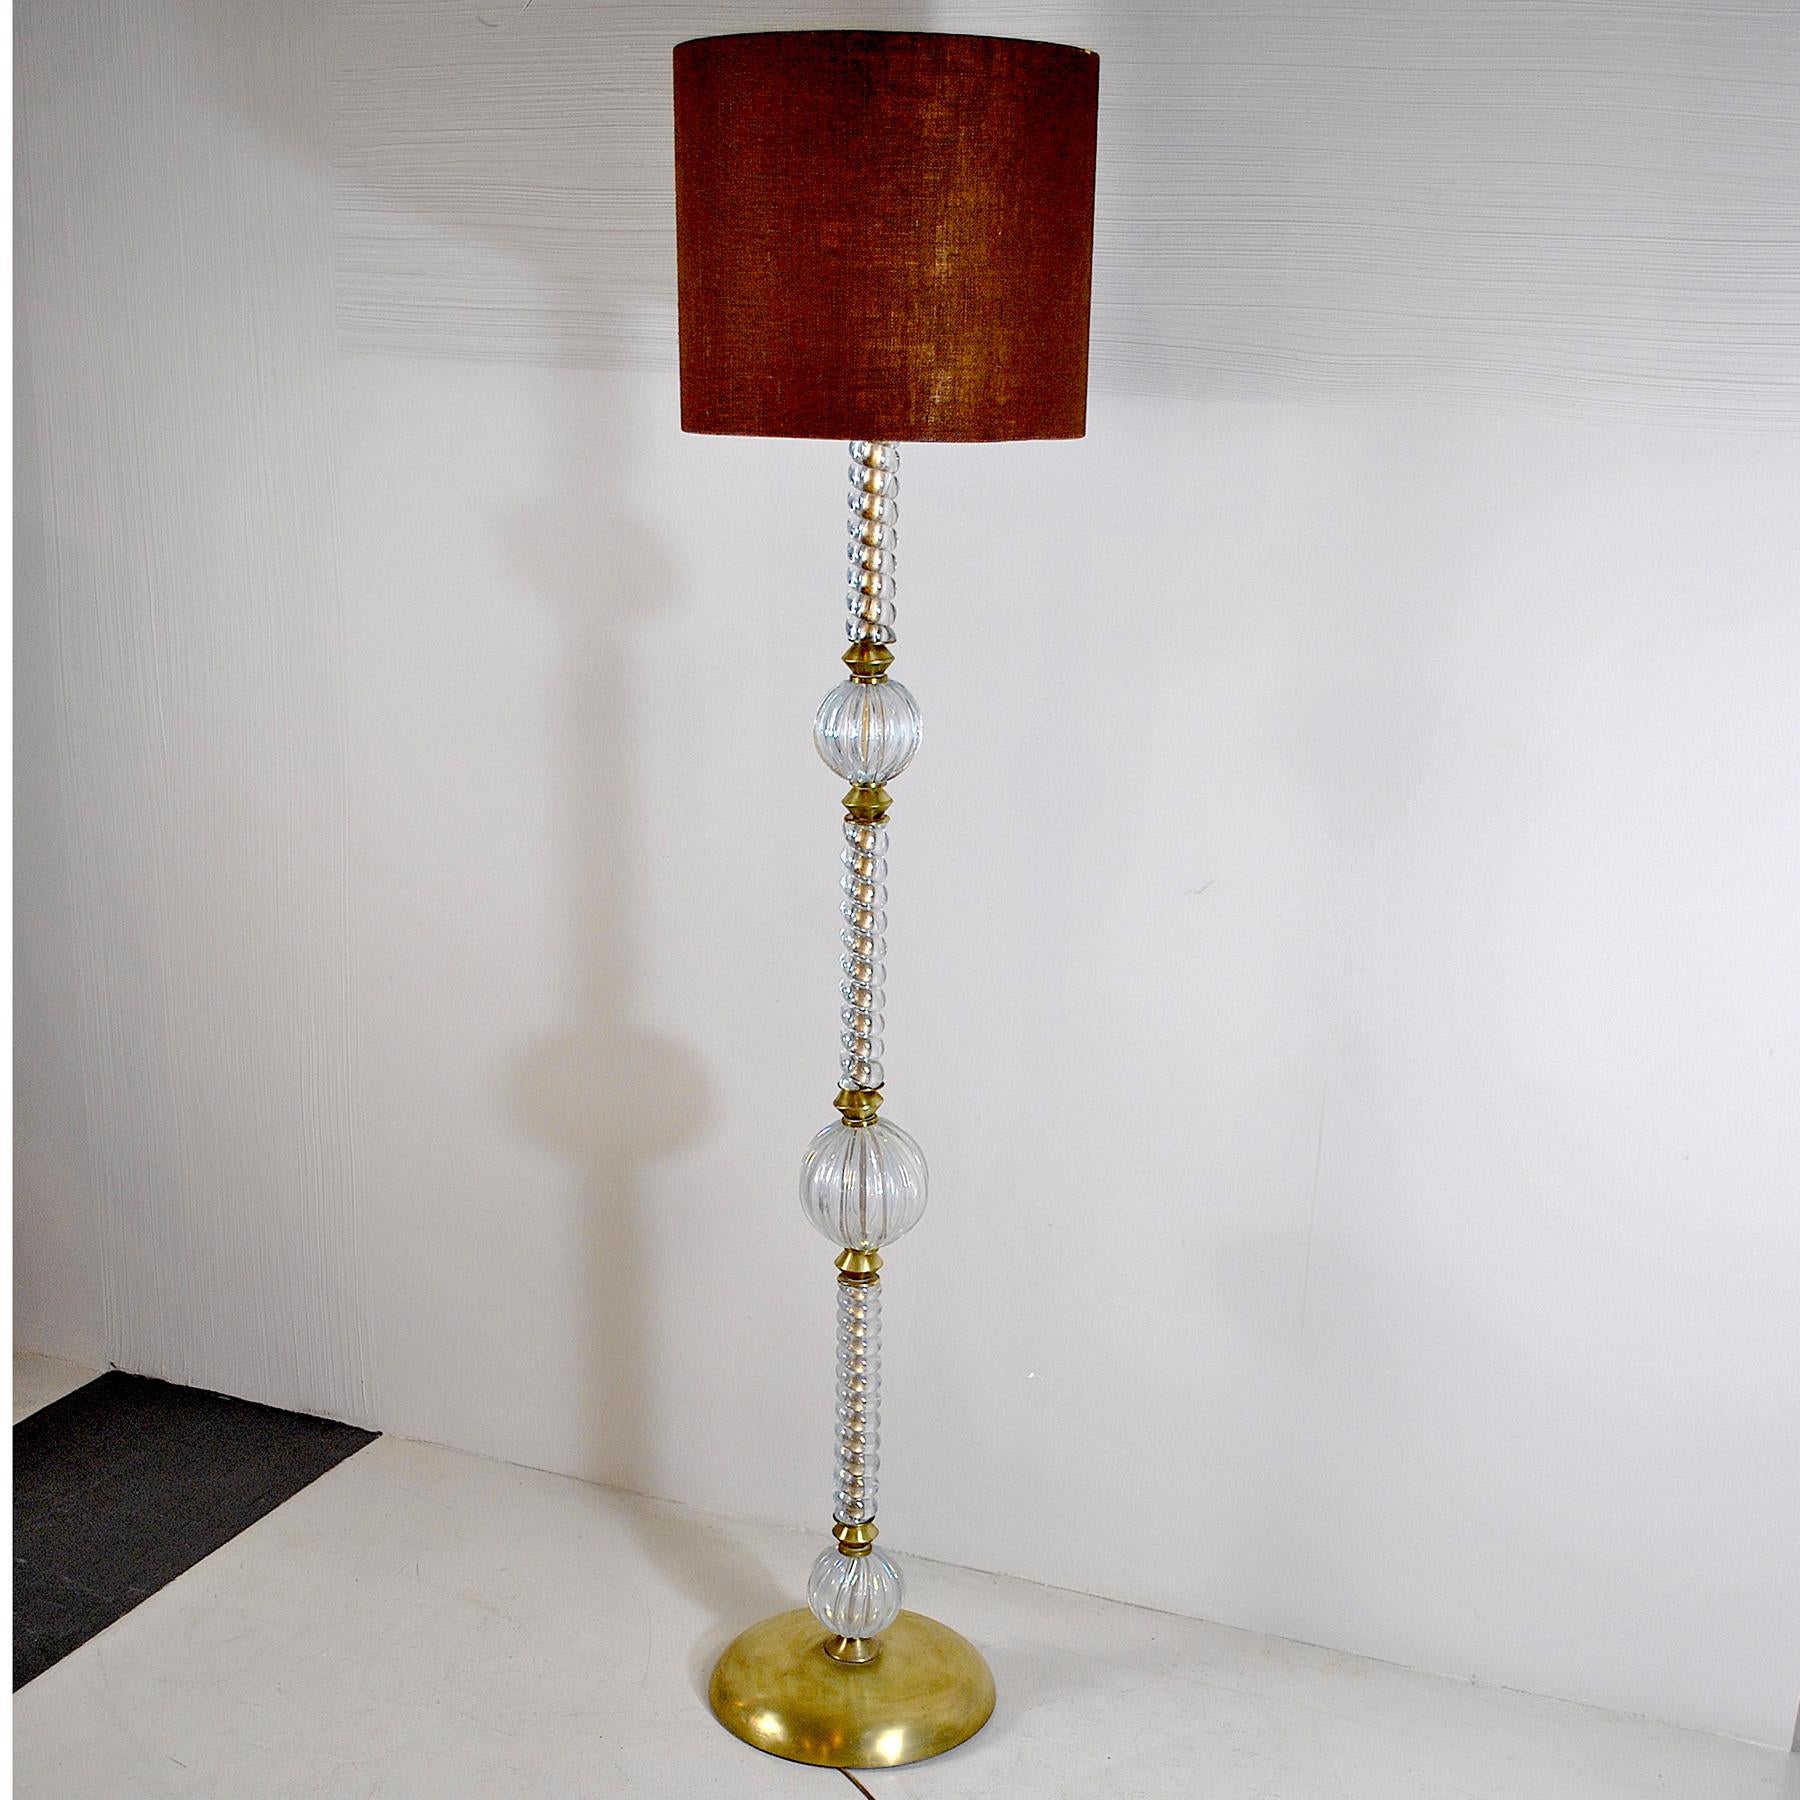 Italian Midcentury Floor Lamp by Barovier & Toso For Sale 5